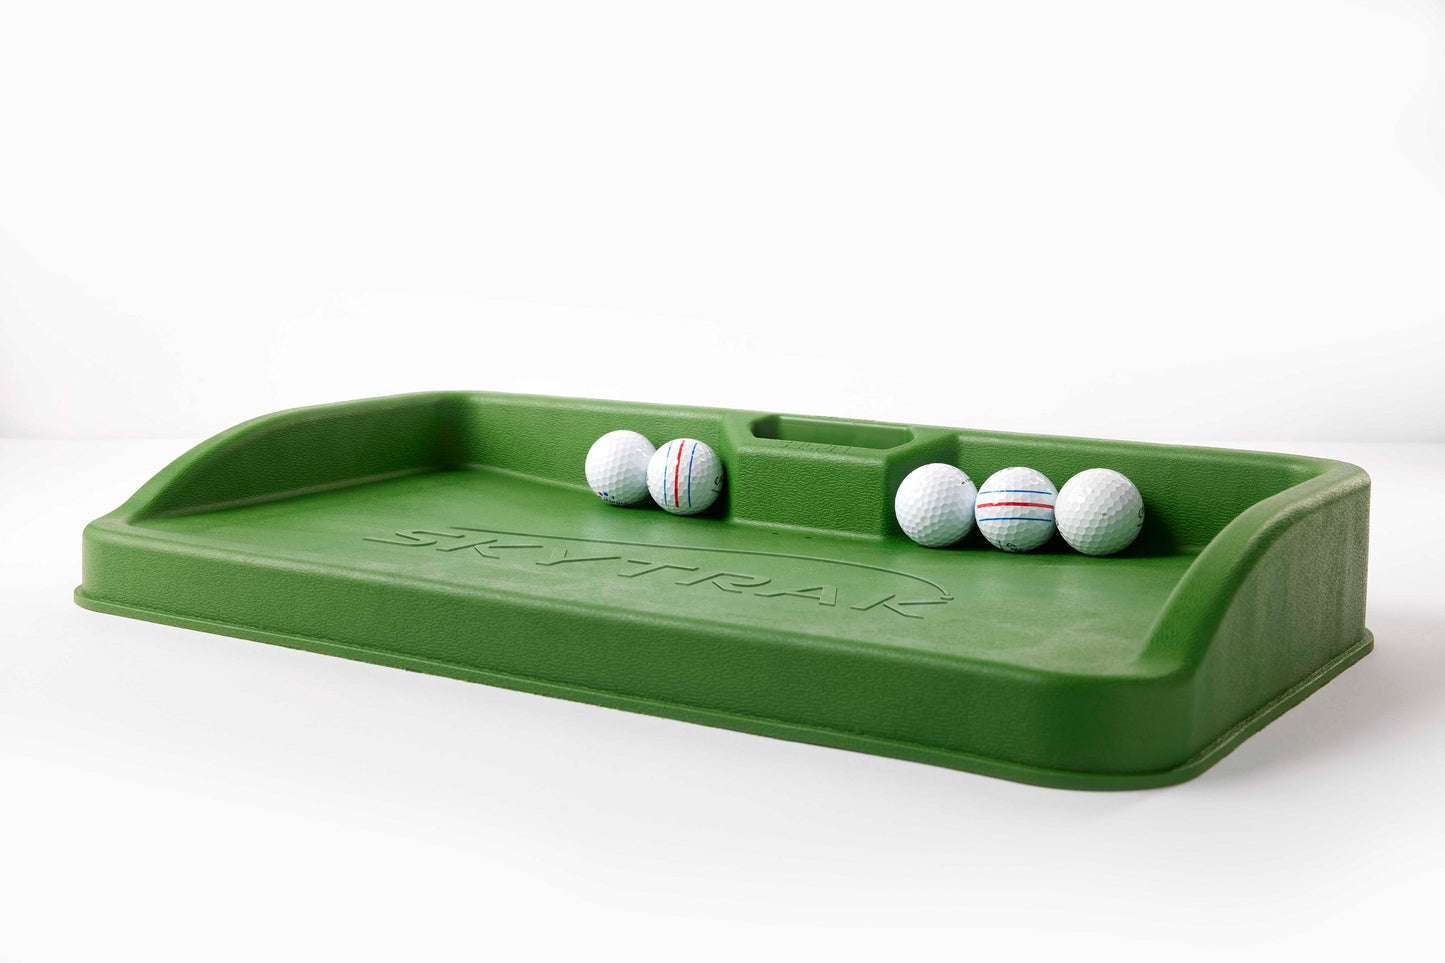 SkyTrak Ball Tray - Enhance Your Practice Sessions